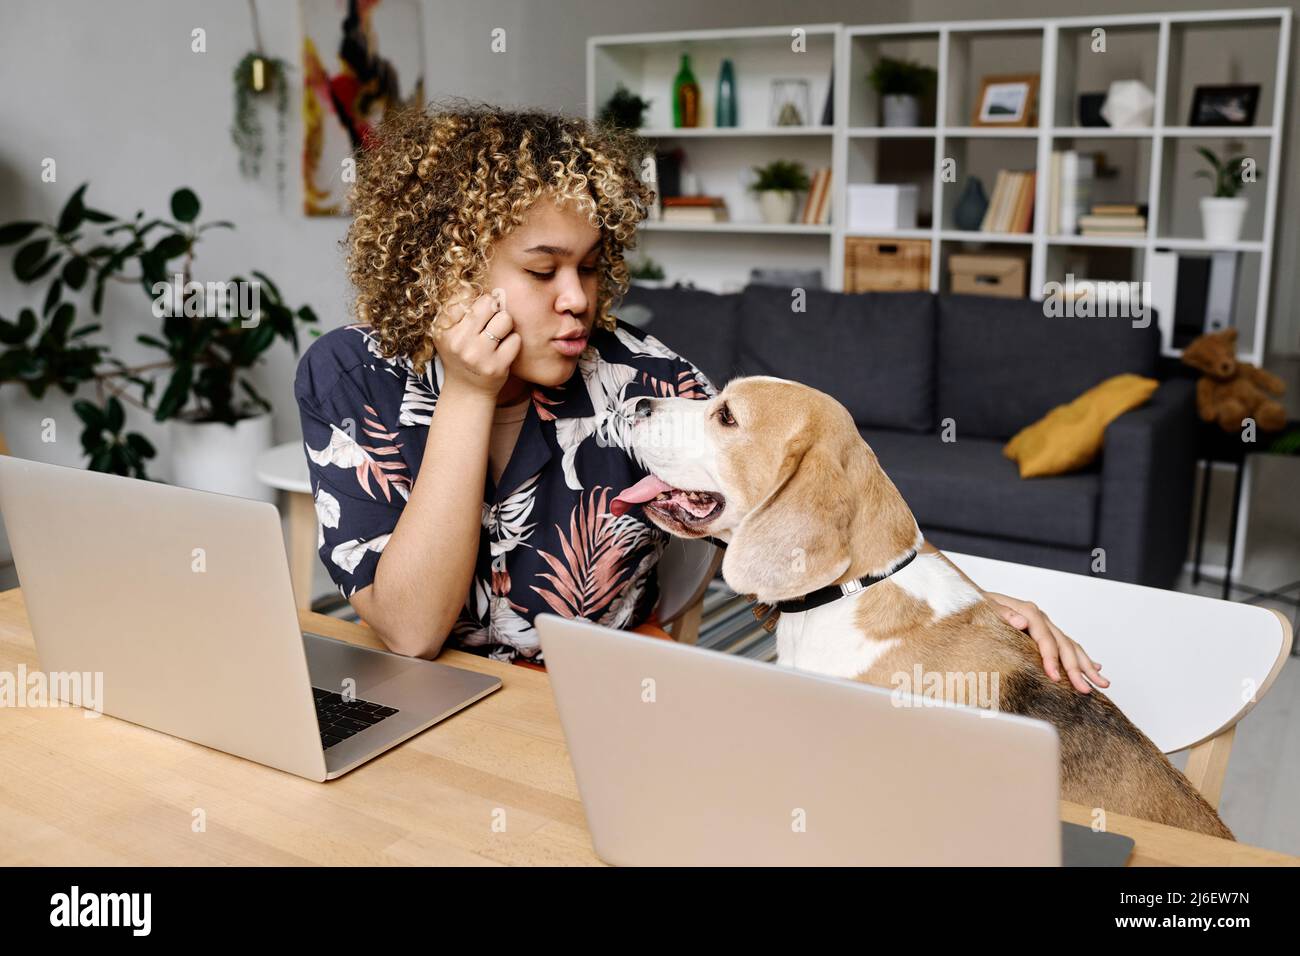 African young woman with curly hair sitting at table with laptop computers and talking to her dog while its sitting on chair Stock Photo